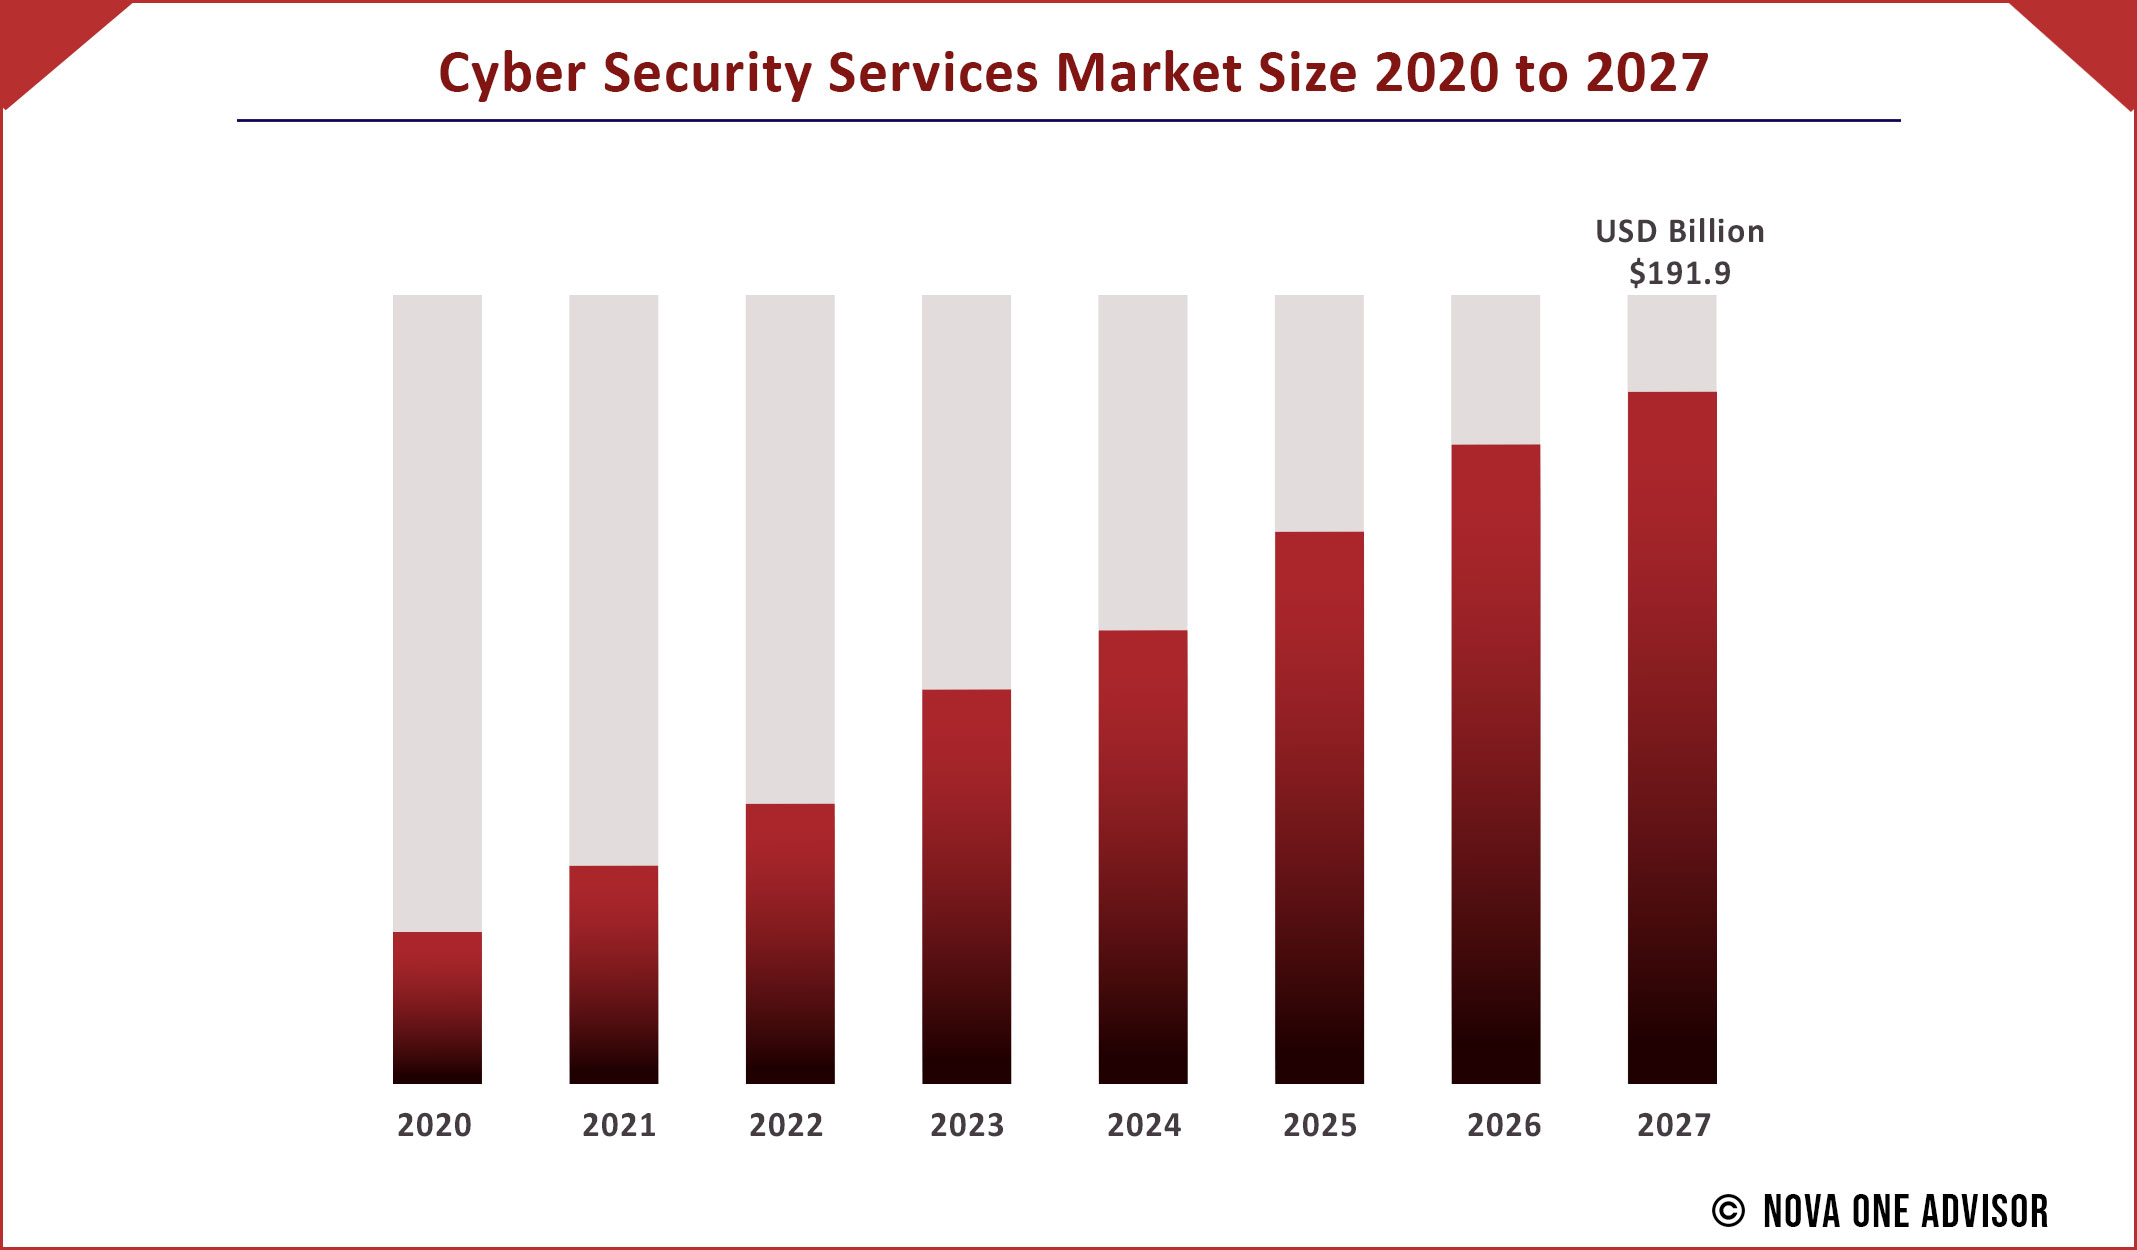 Cyber Security Services Market Size 2020 to 2027